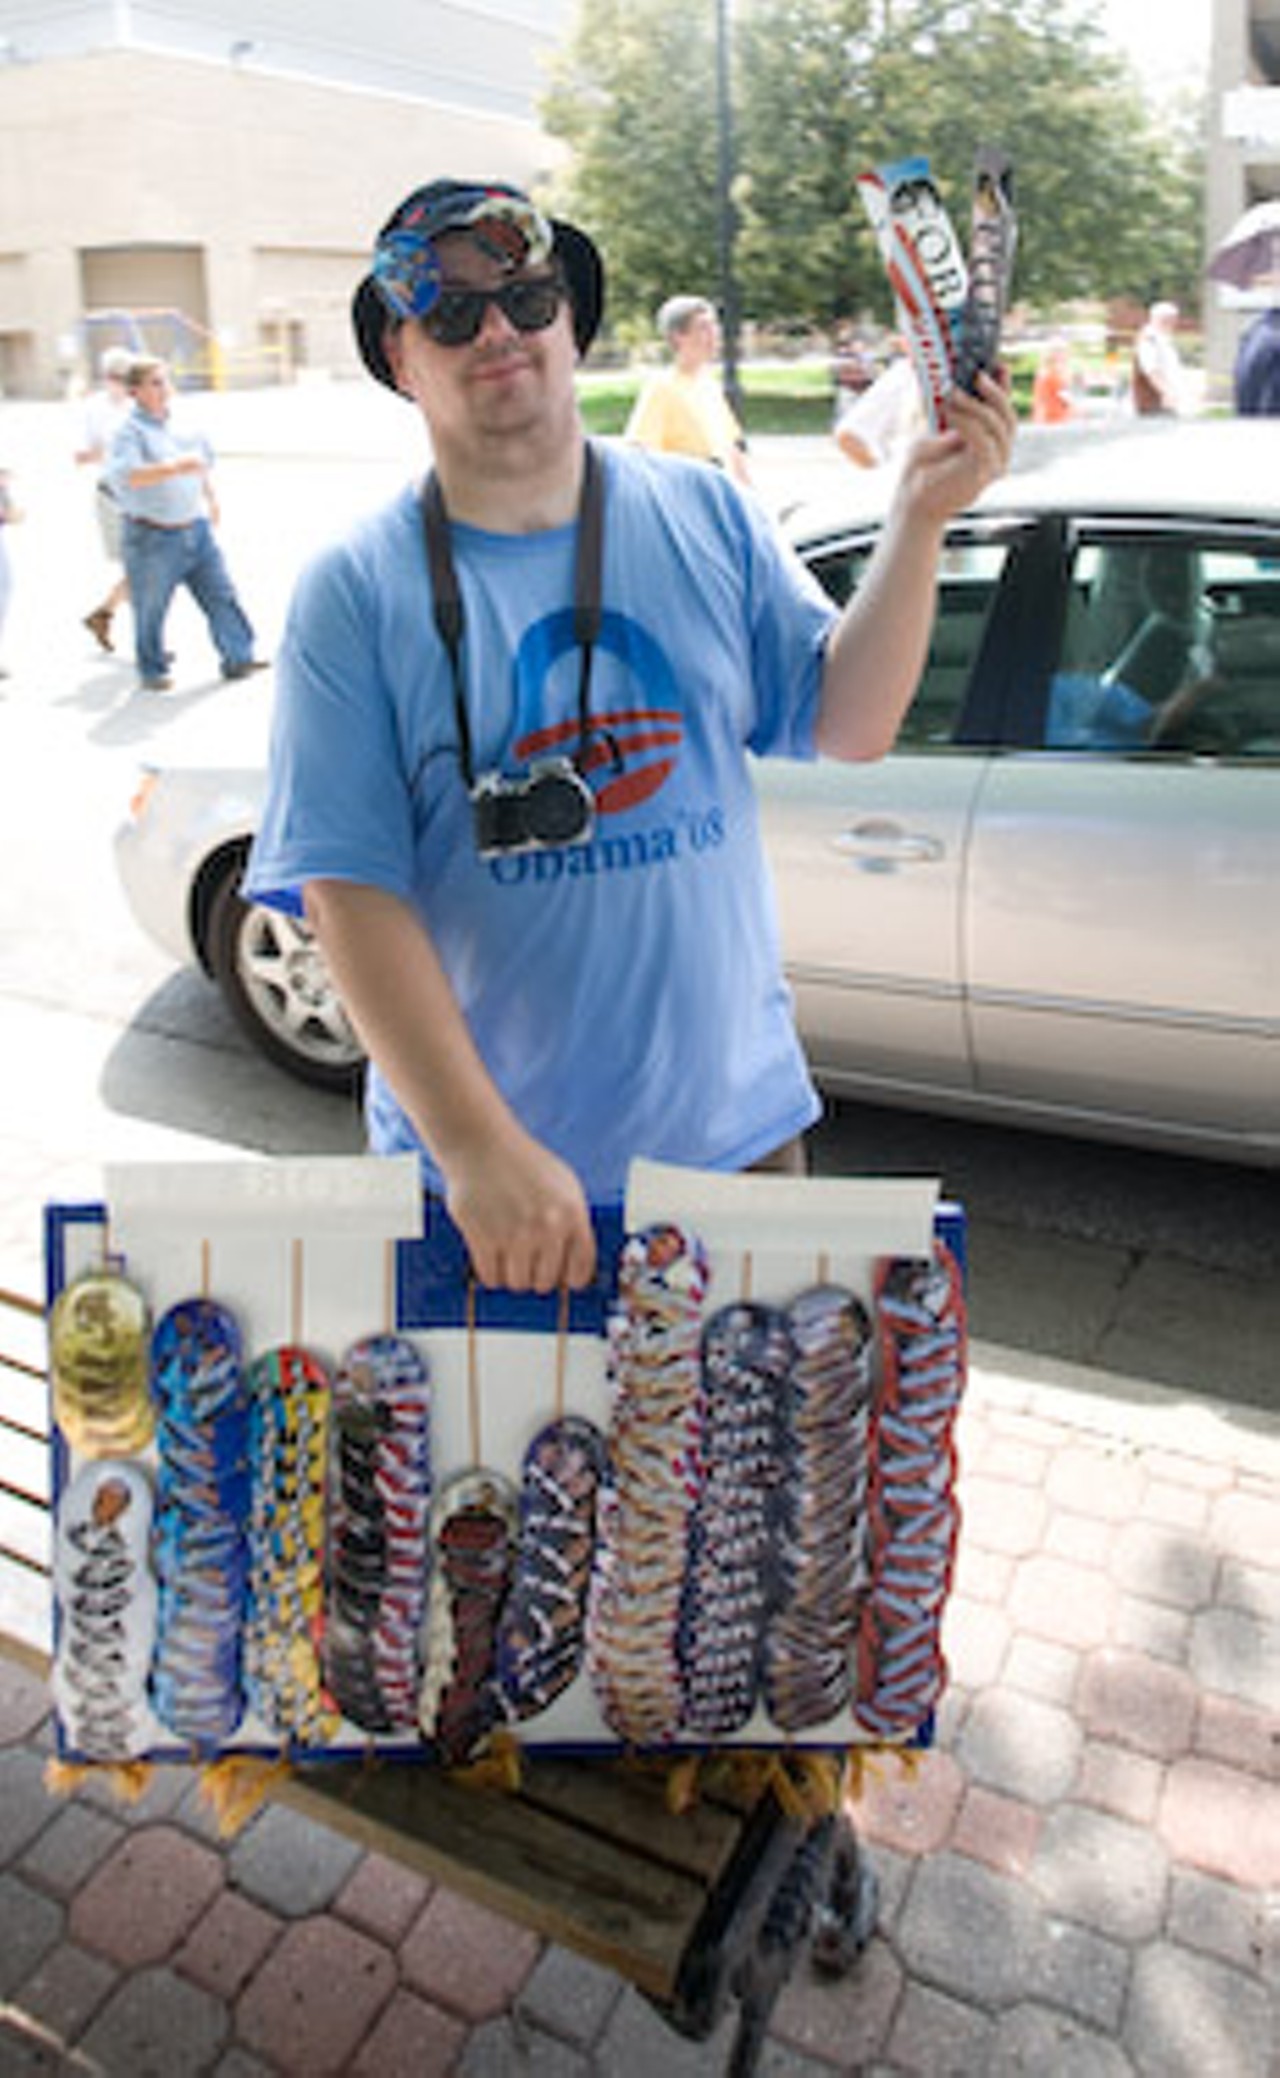 The streets of Springfield were filled with Obama merchandise vendors, many of whom were not affiliated with the campaign.